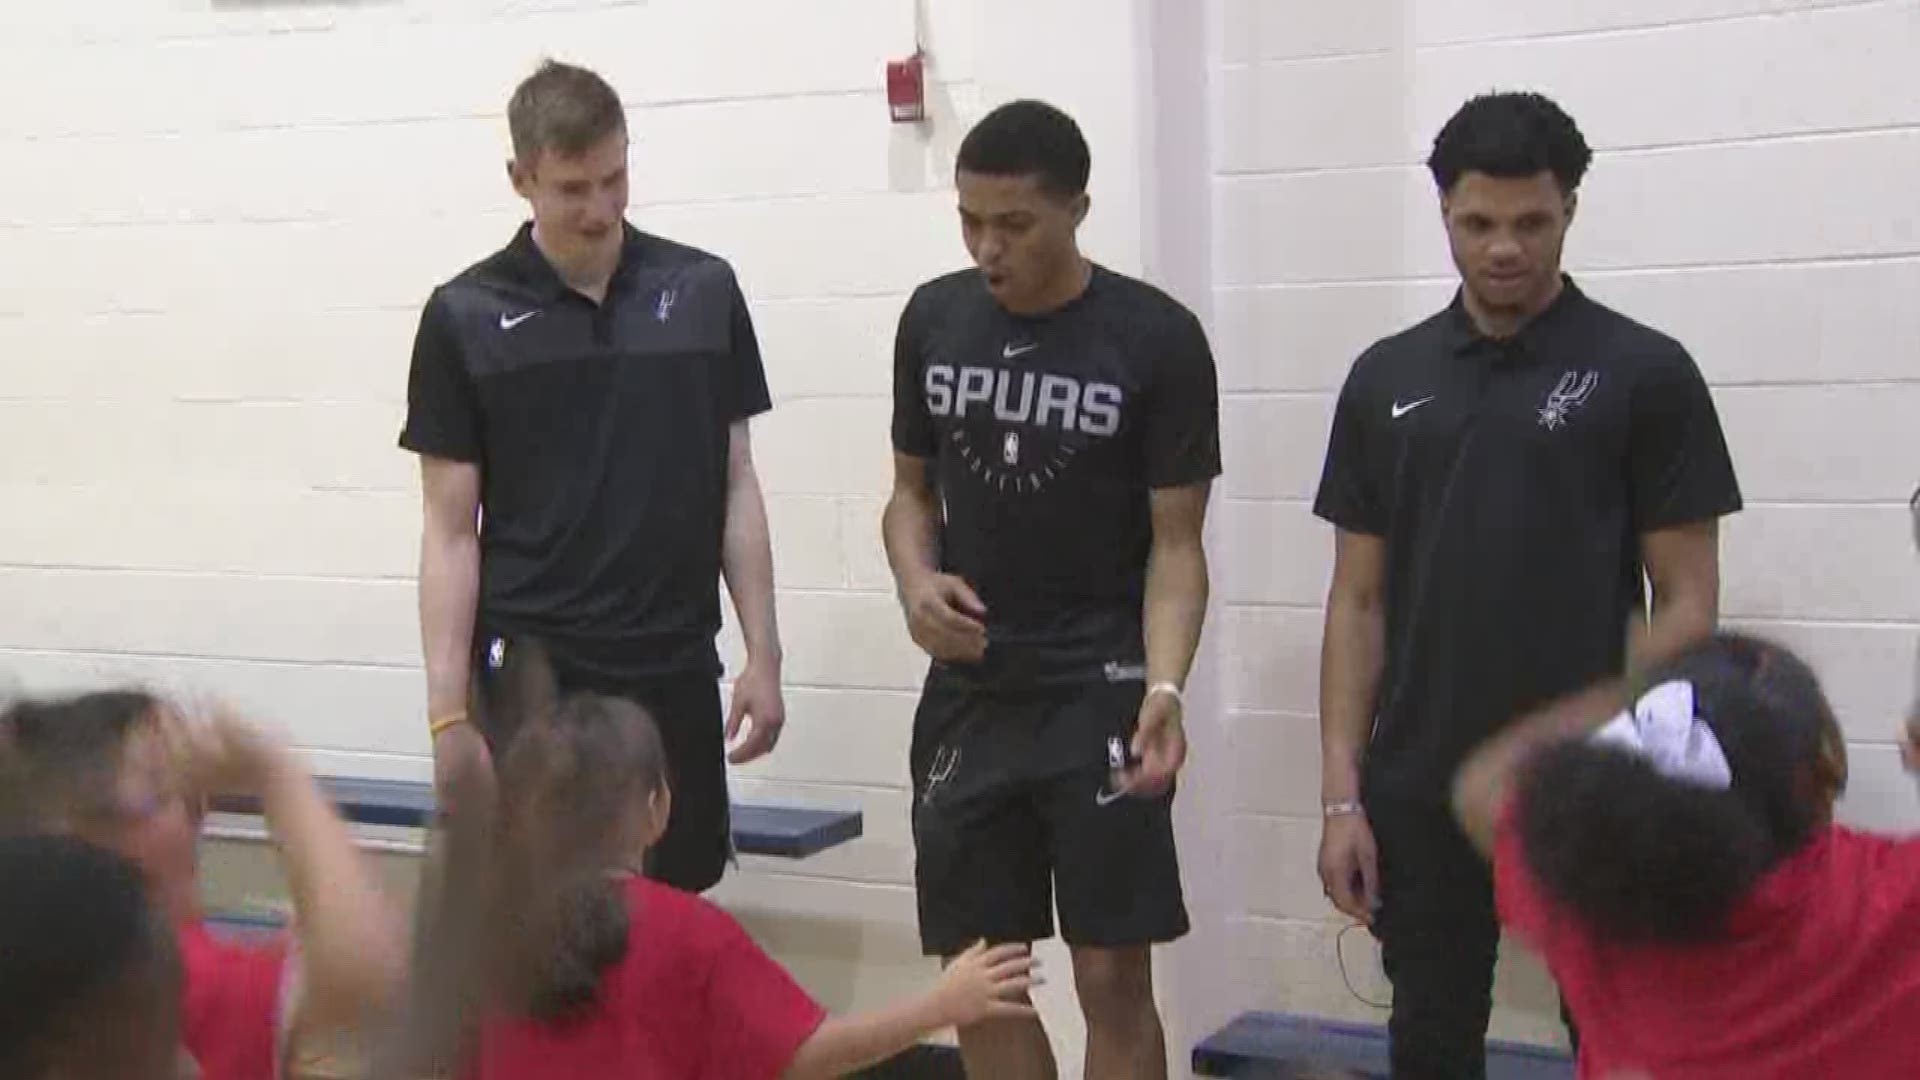 The Spurs wasted no time in getting their three 2019 draft picks out into the community Tuesday, sending them to participate in a basketball clinic at the Eastside Boys & Girls Club.